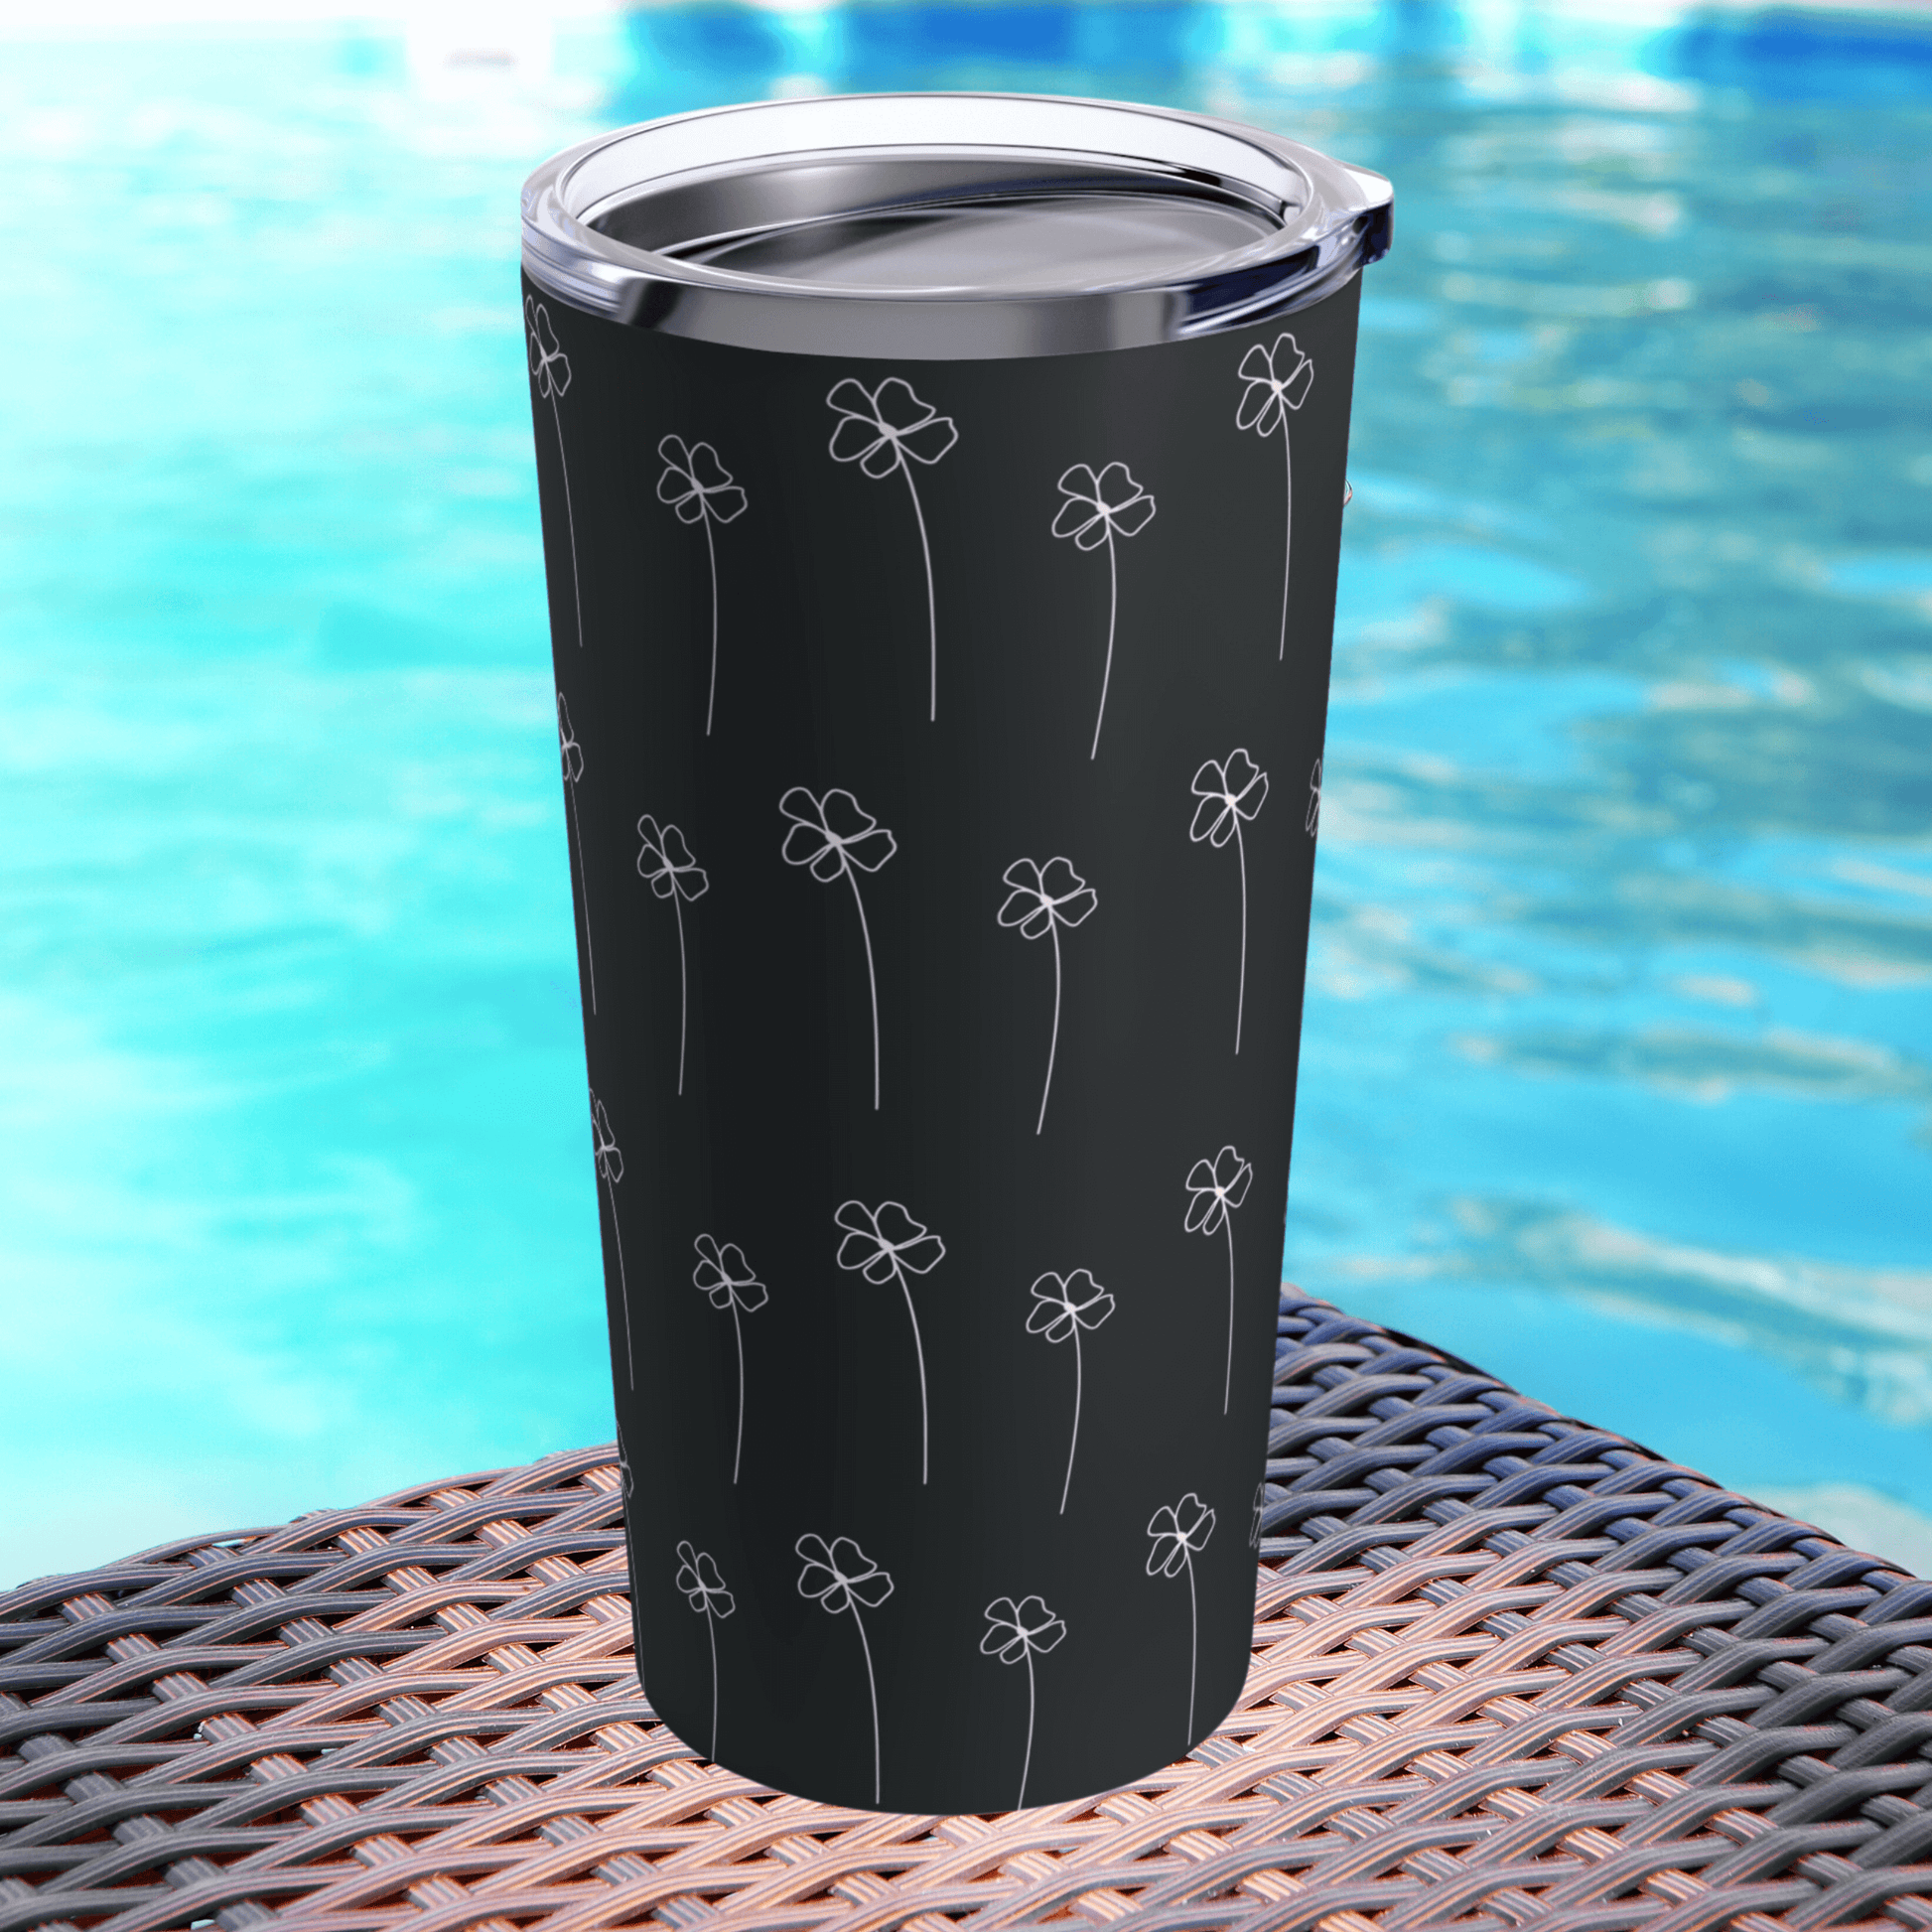 Our black tumbler cup is next to a pool and shows the glossy finish.